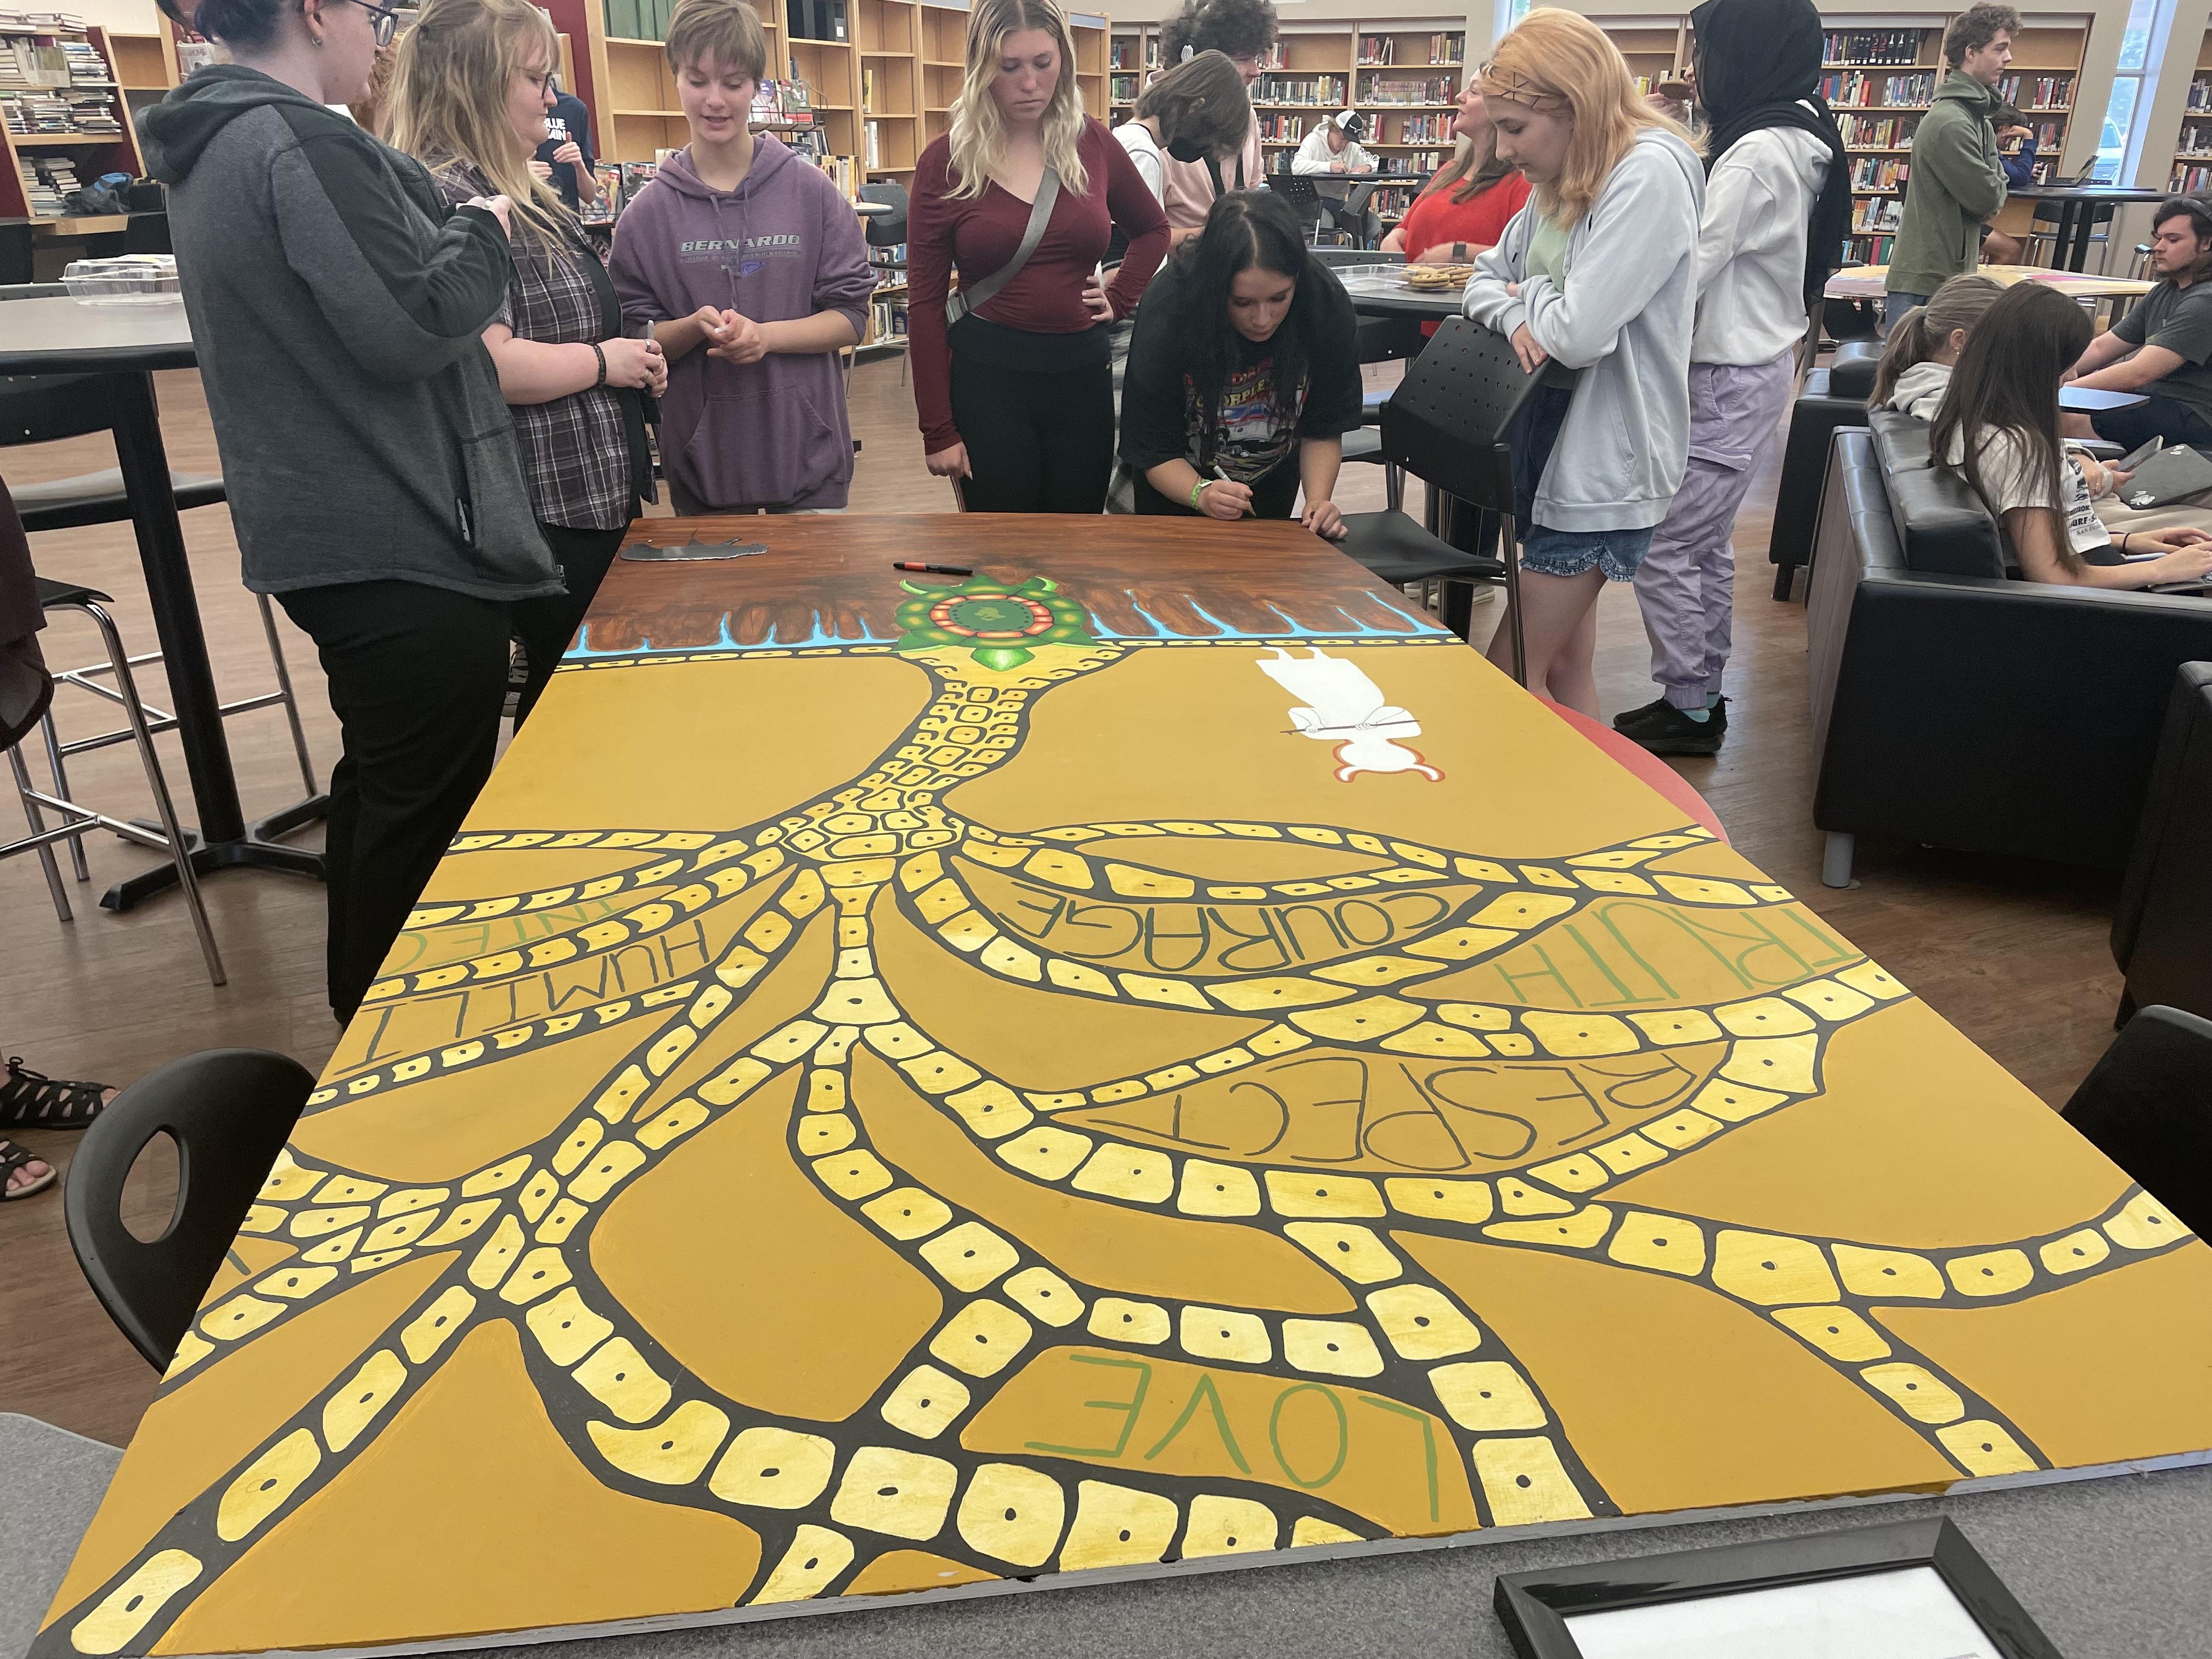 Image of students signing the art piece while it rests on a table